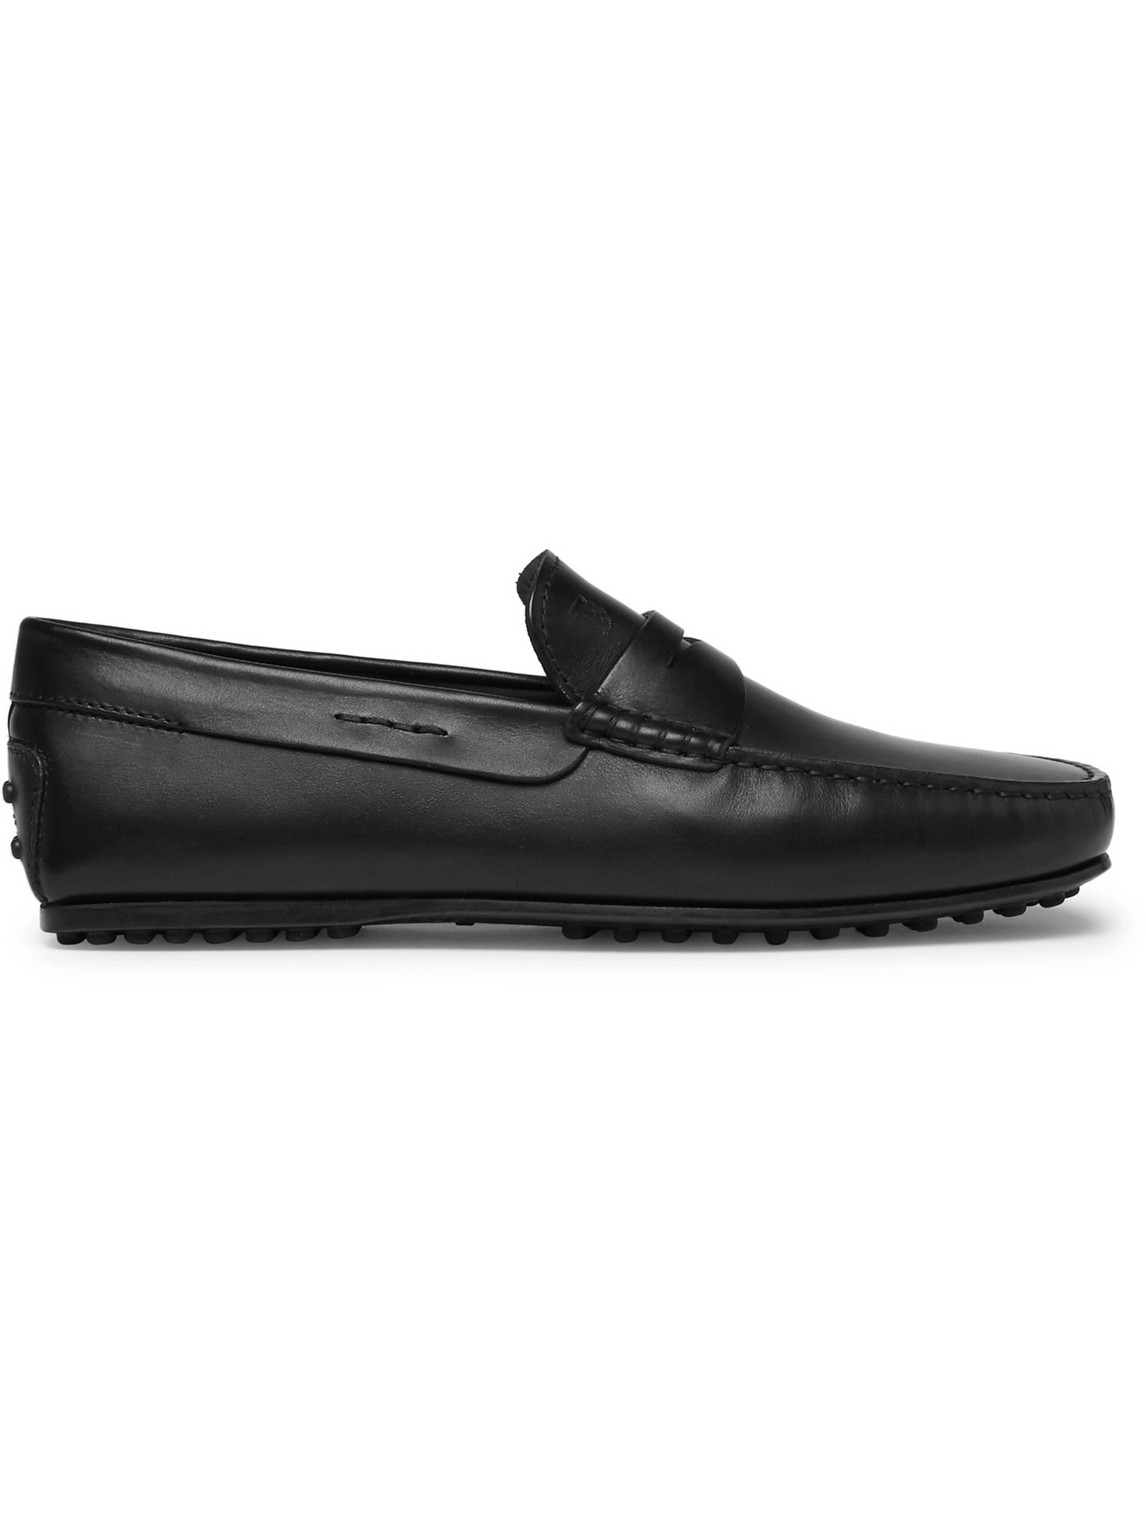 TOD'S CITY GOMMINO LEATHER PENNY LOAFERS